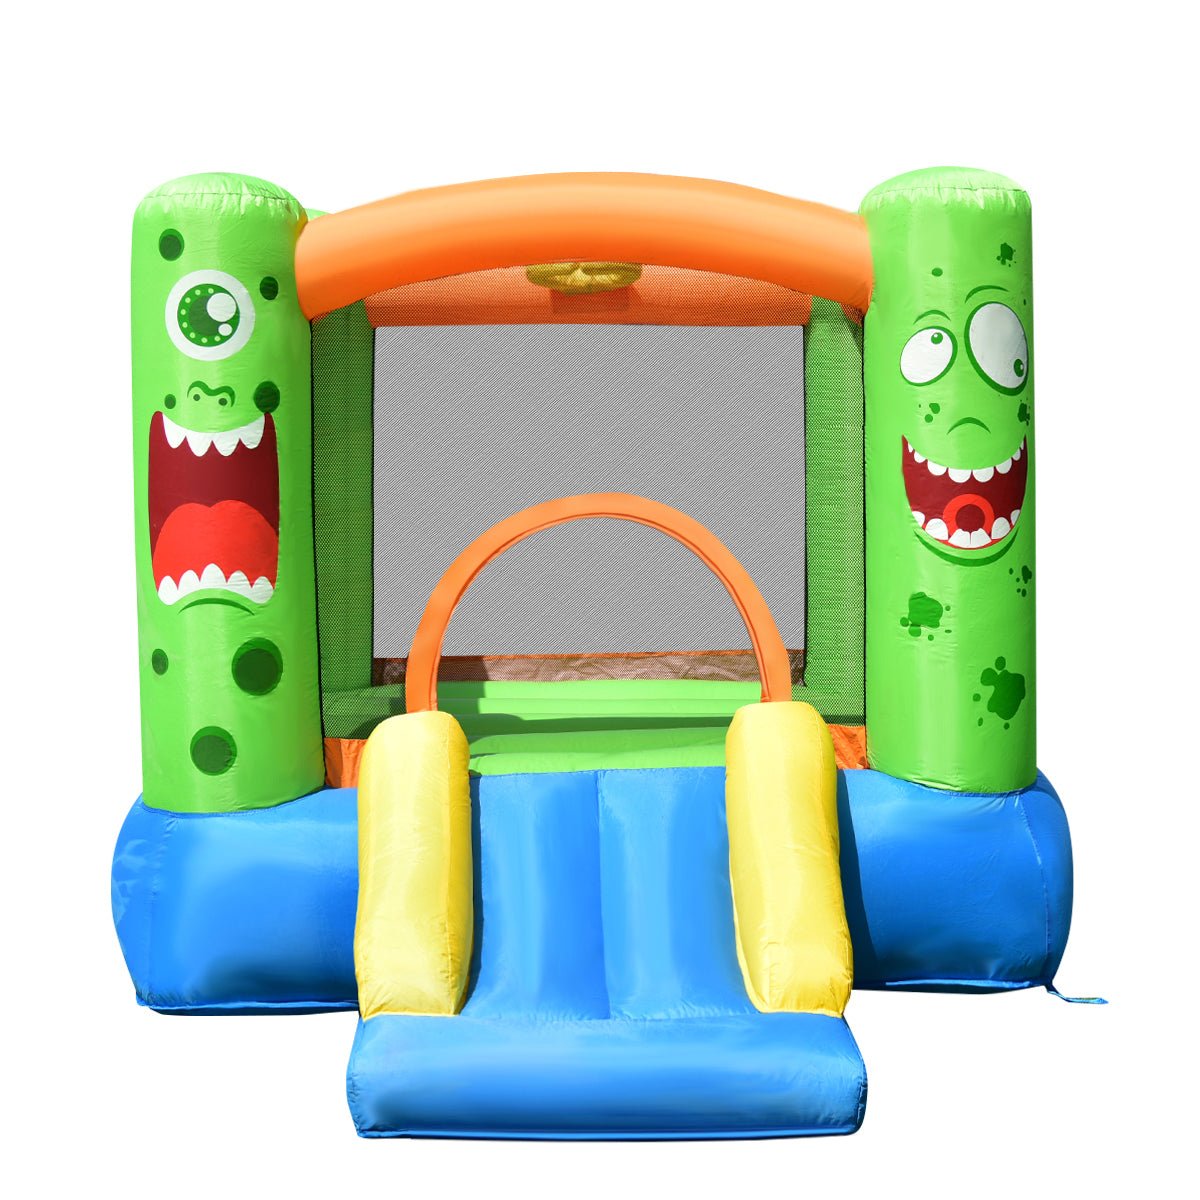 Inflatable Play Center for Kids - Bounce, Slide, Basketball, and Joy